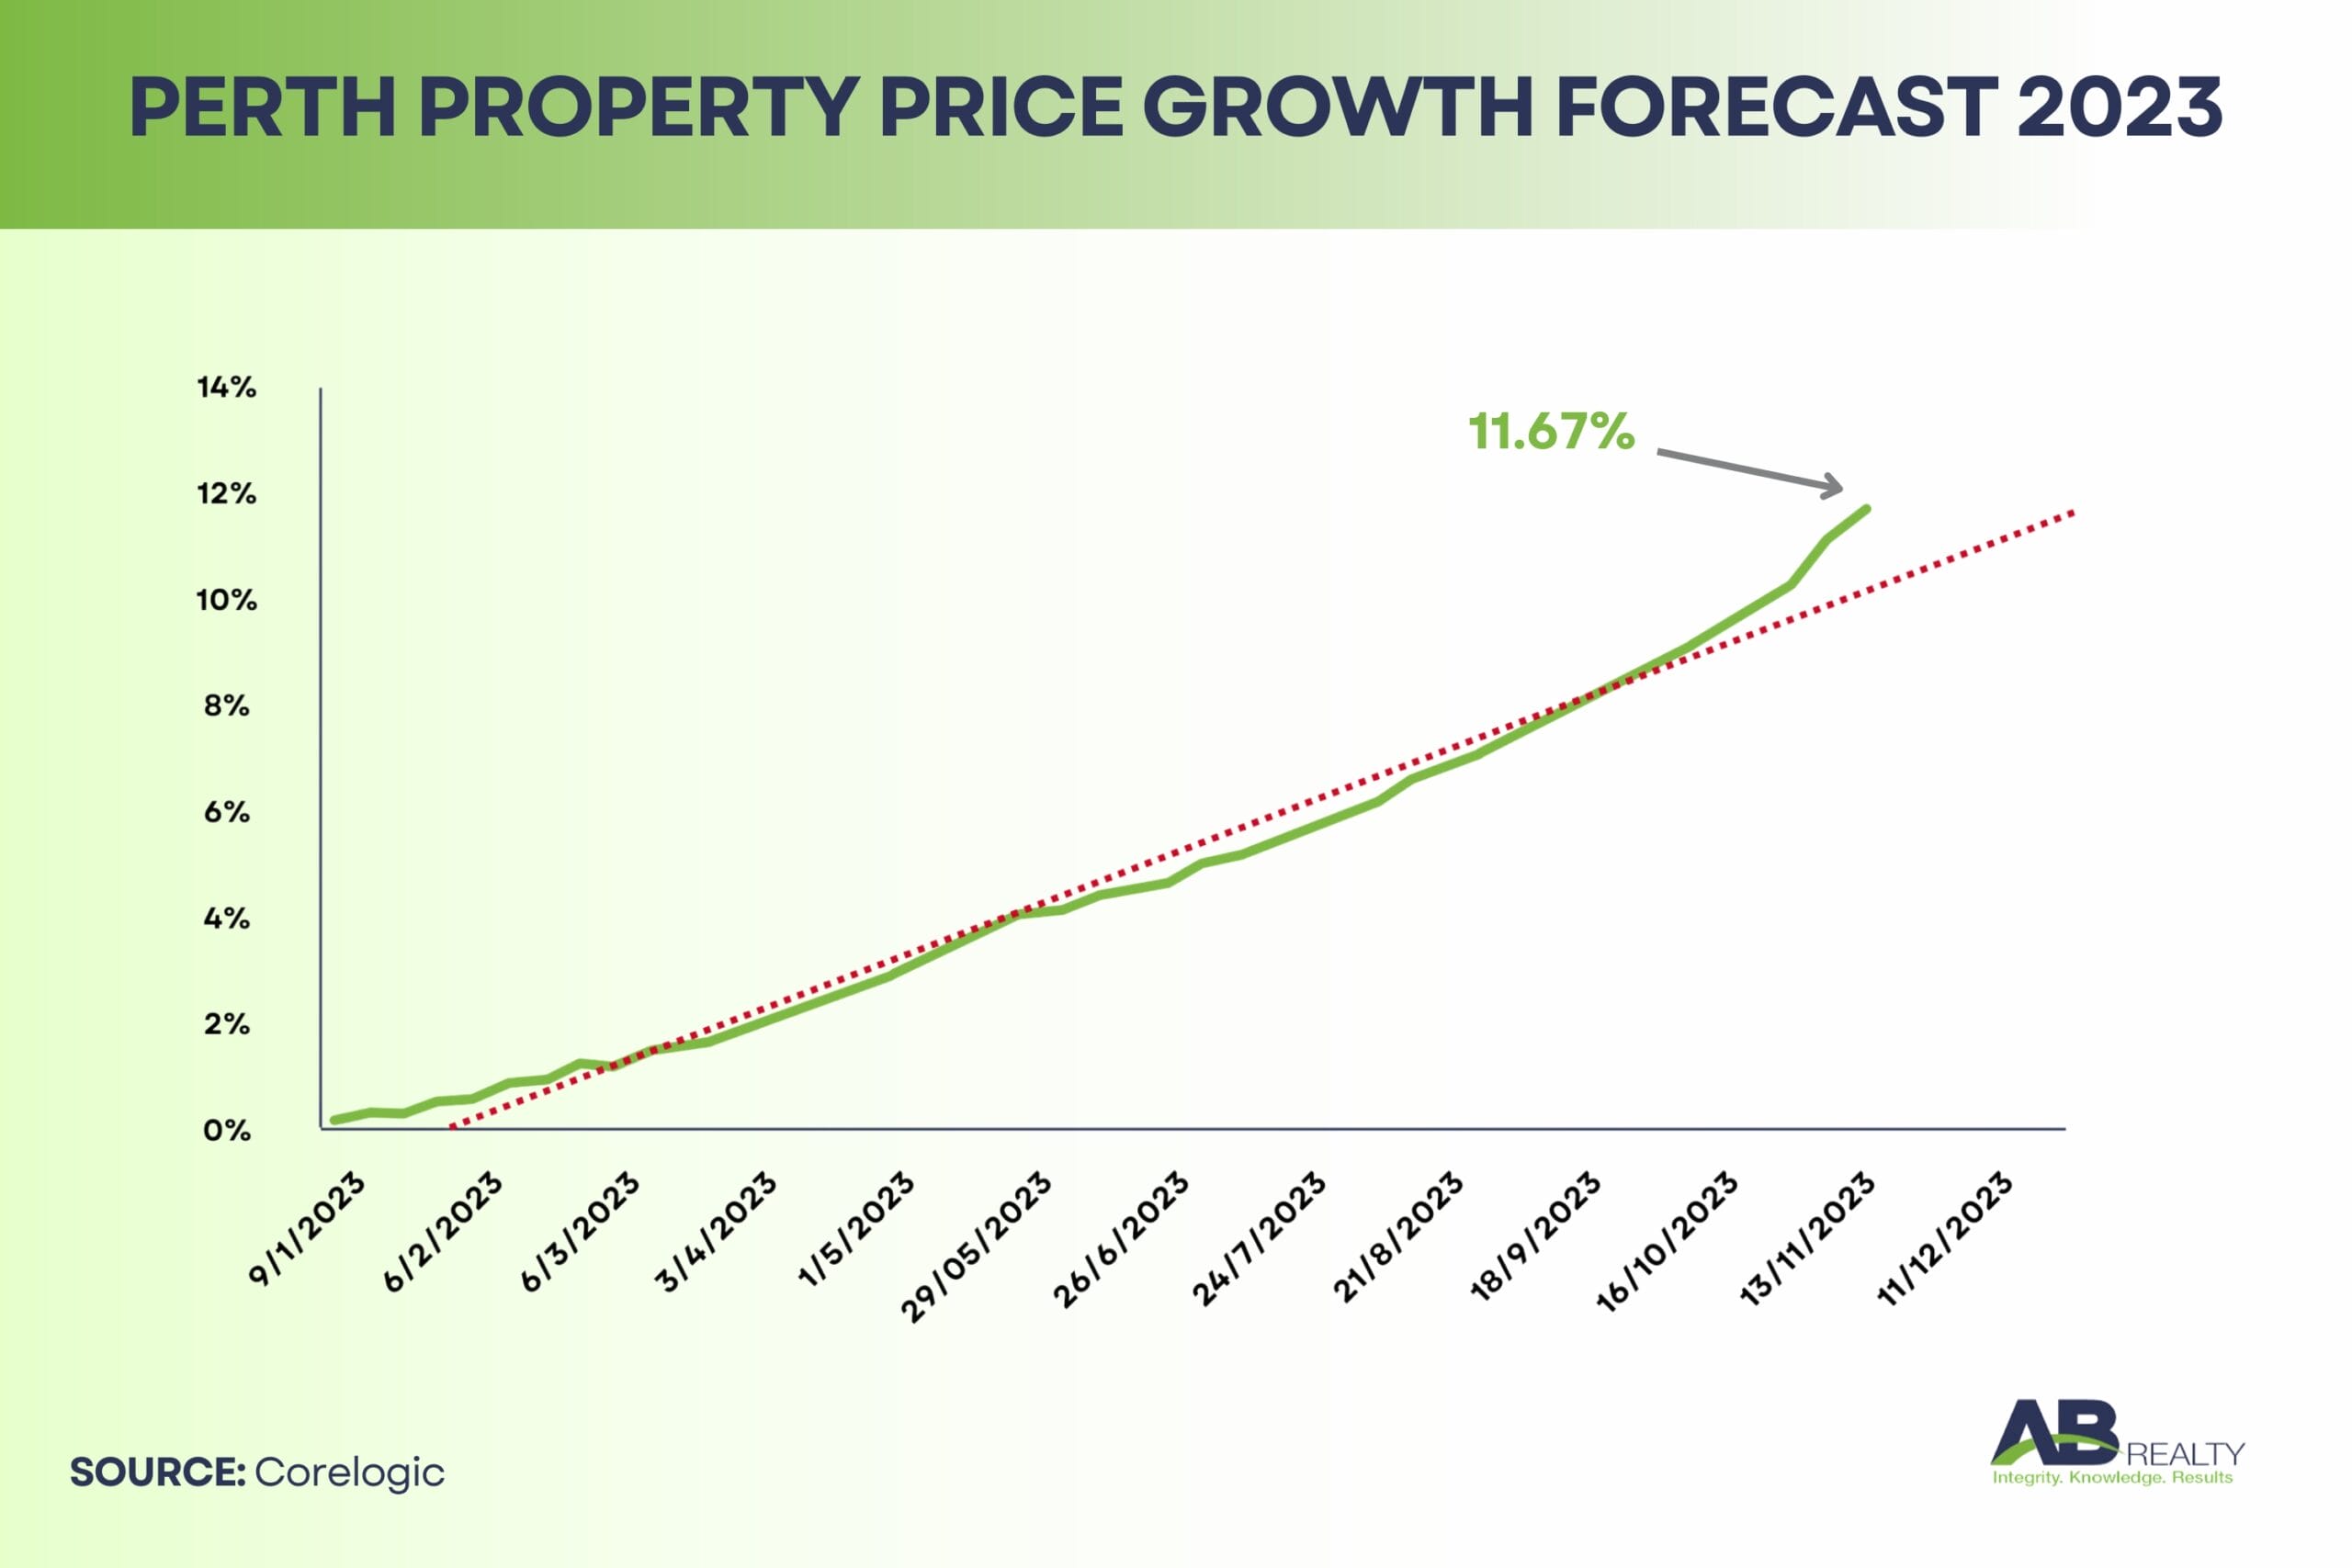 Perth Property Price Growth Forecast 2023